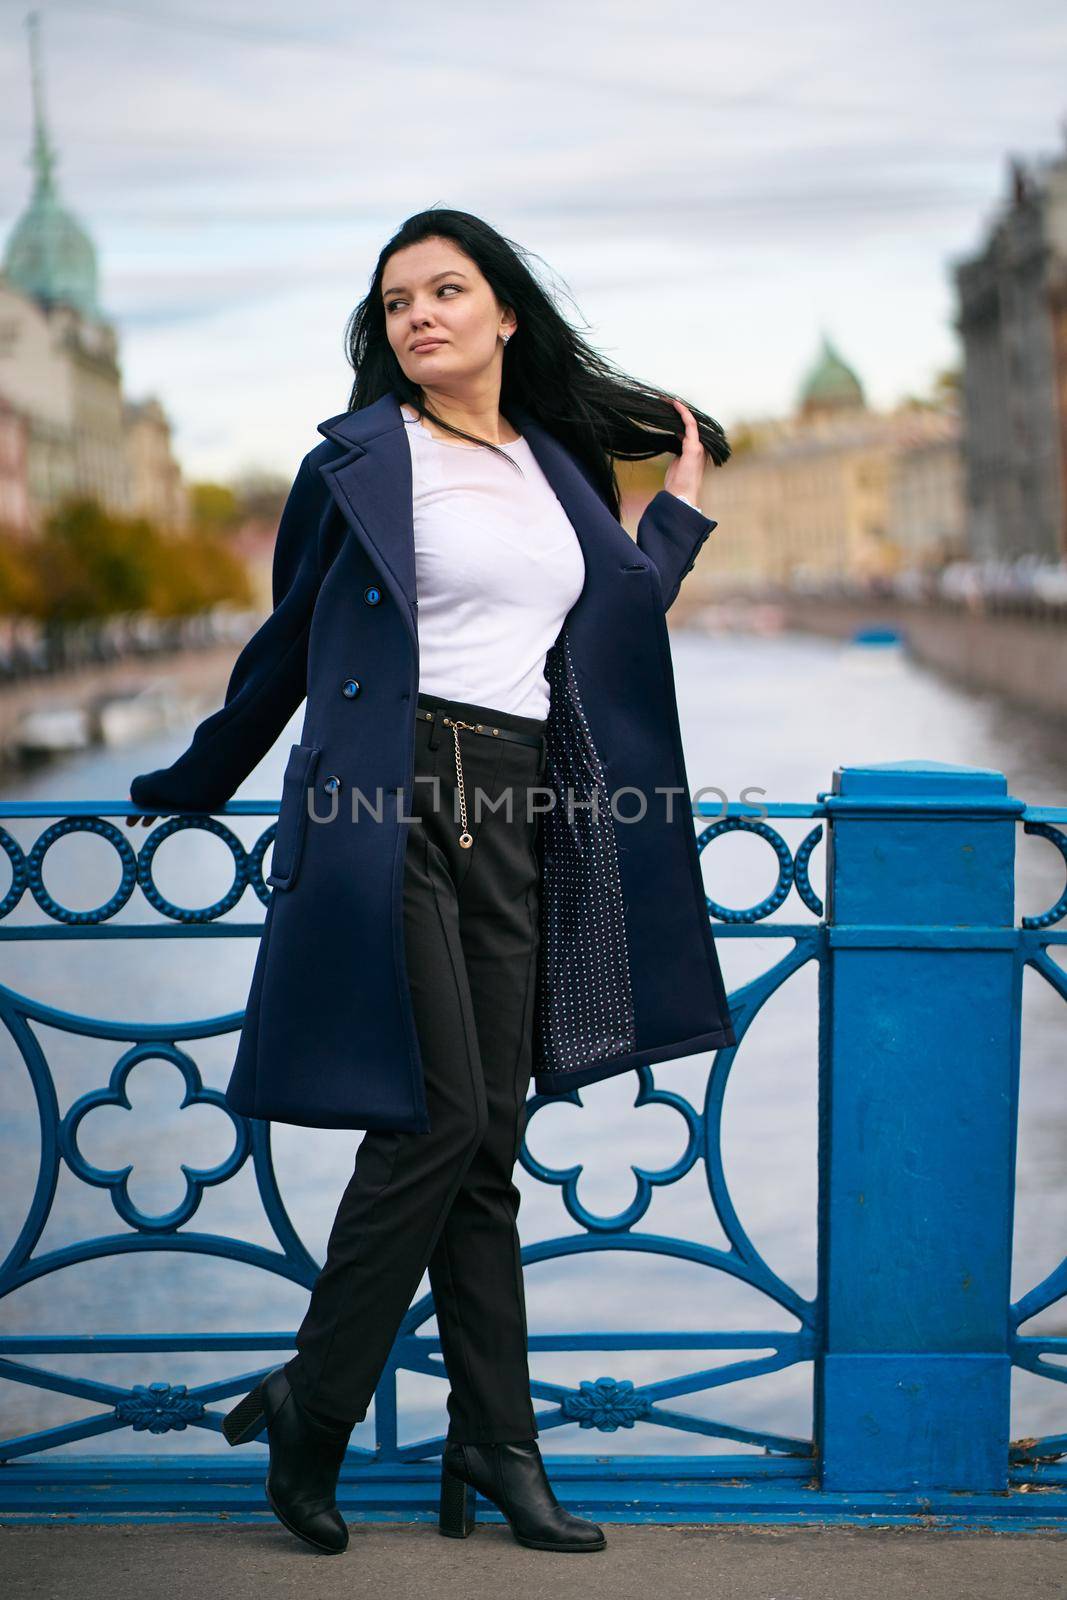 Charming thoughtful fashionably dressed woman with long dark hair travels through Europe, standing in city center of St. Petersburg. A beautiful girl wanders alone through autumn streets by NataBene